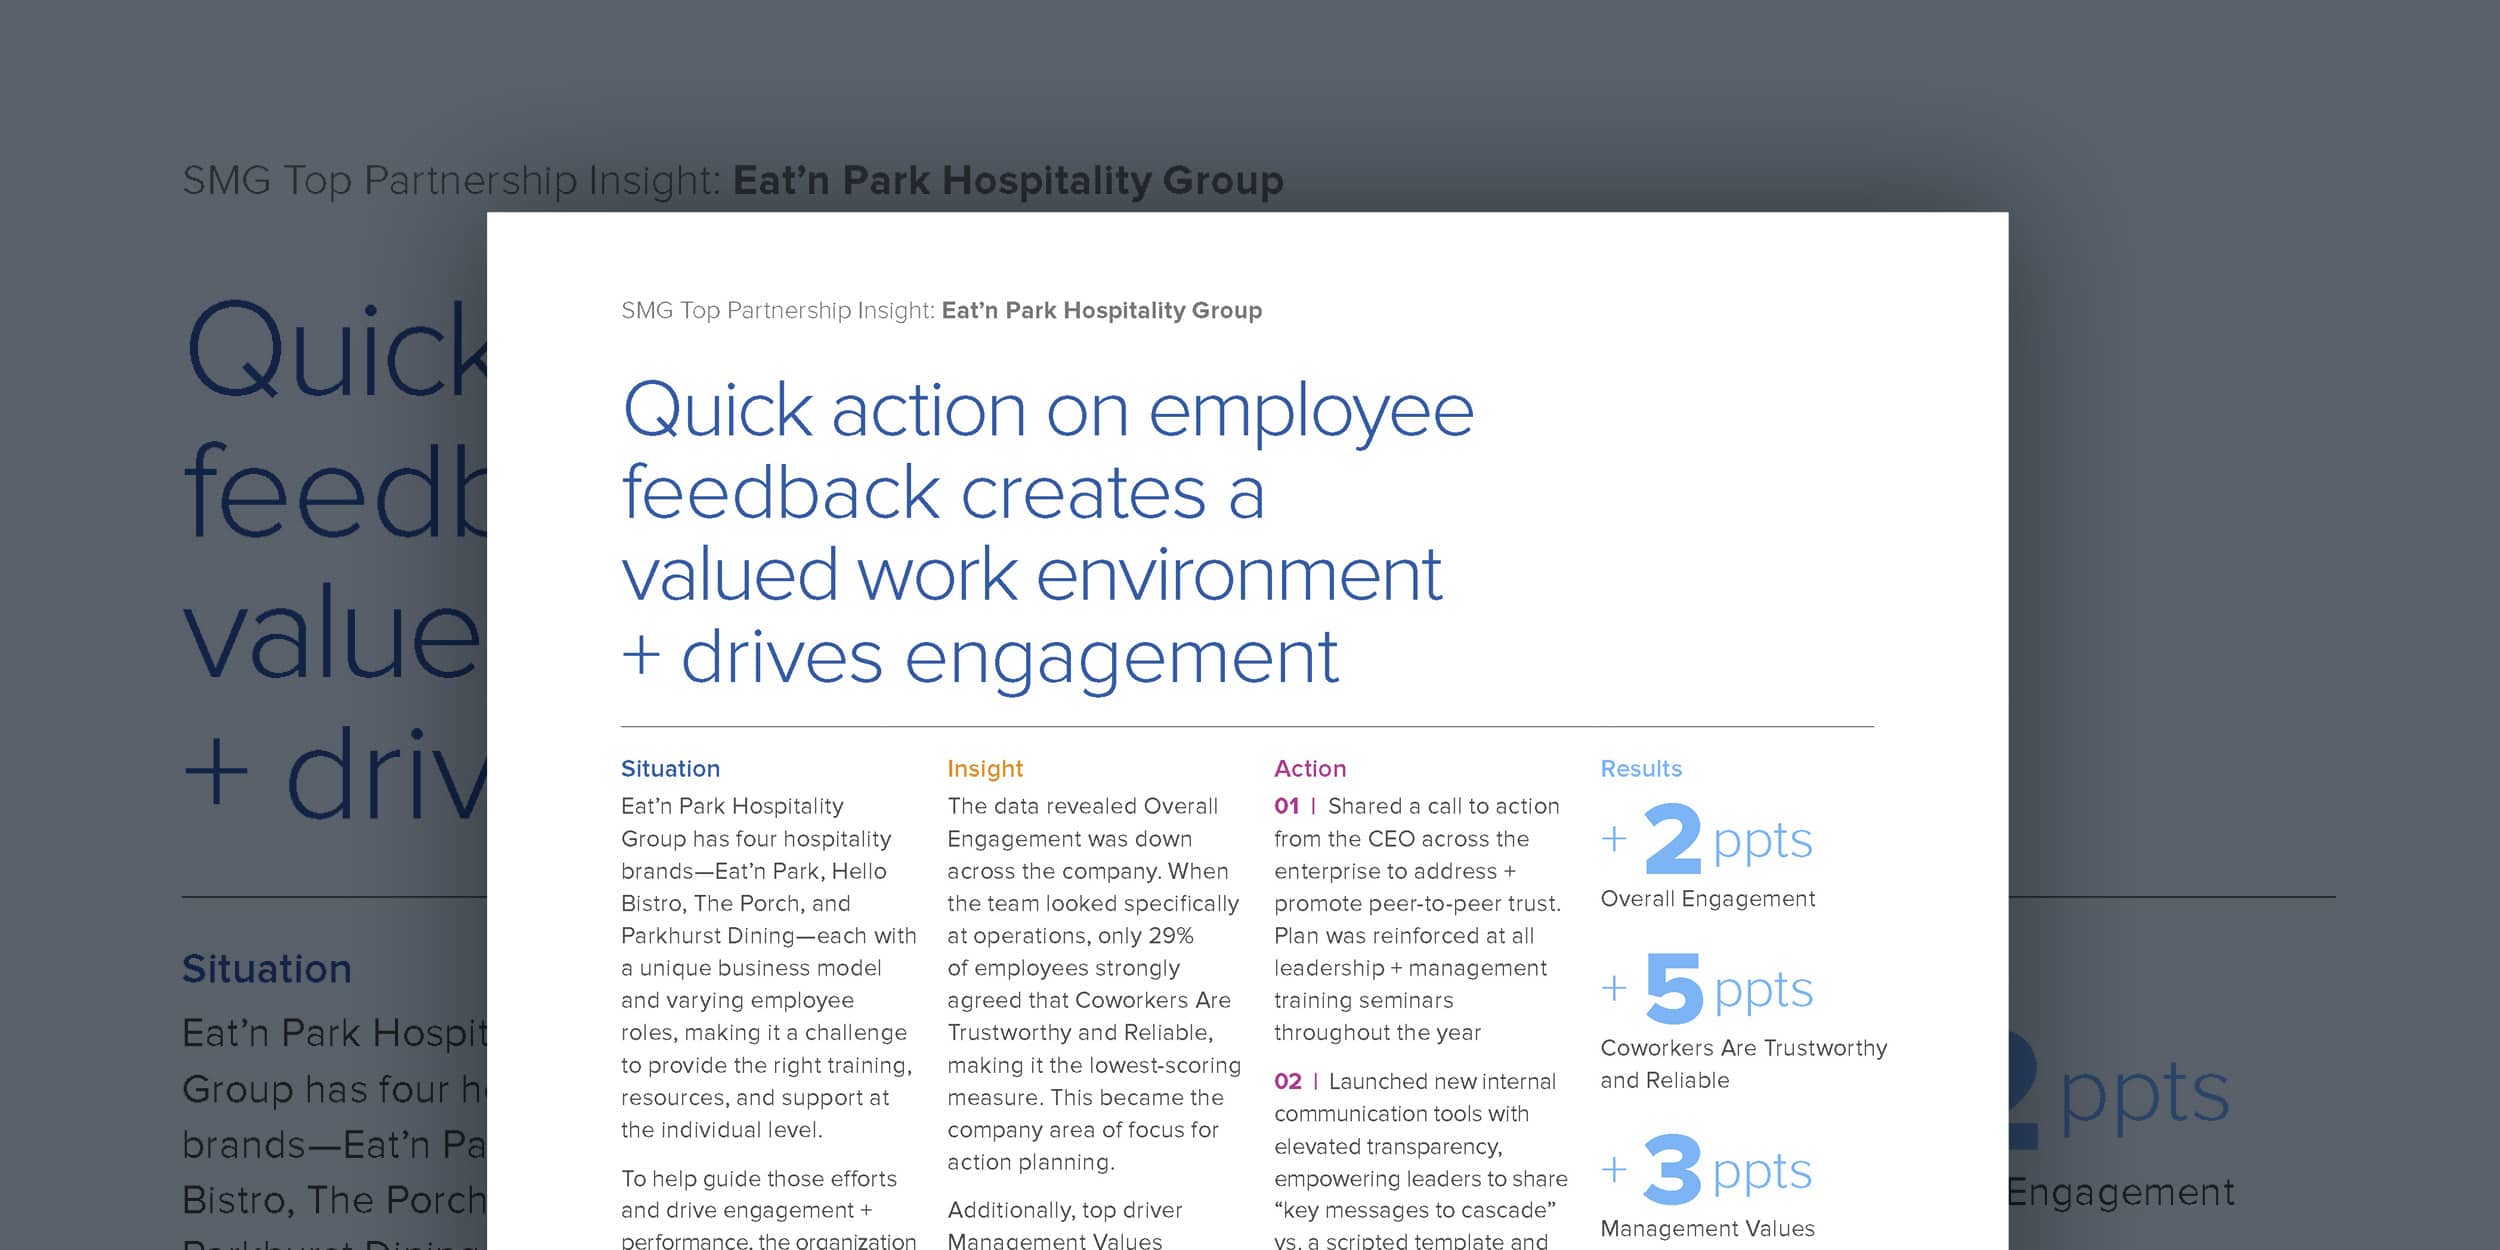 How to create a valued work environment + drive employee engagement